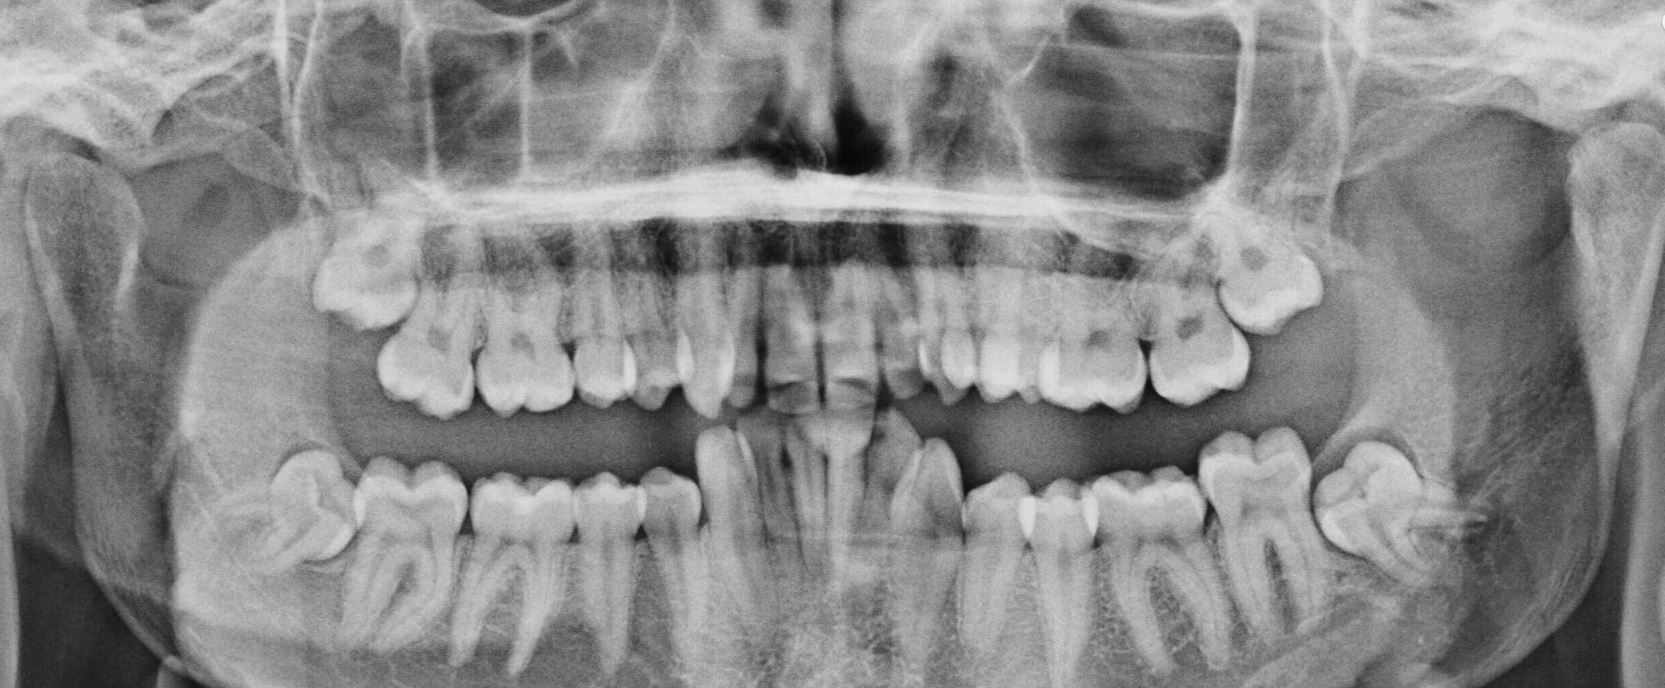 Wisdom Tooth OPG